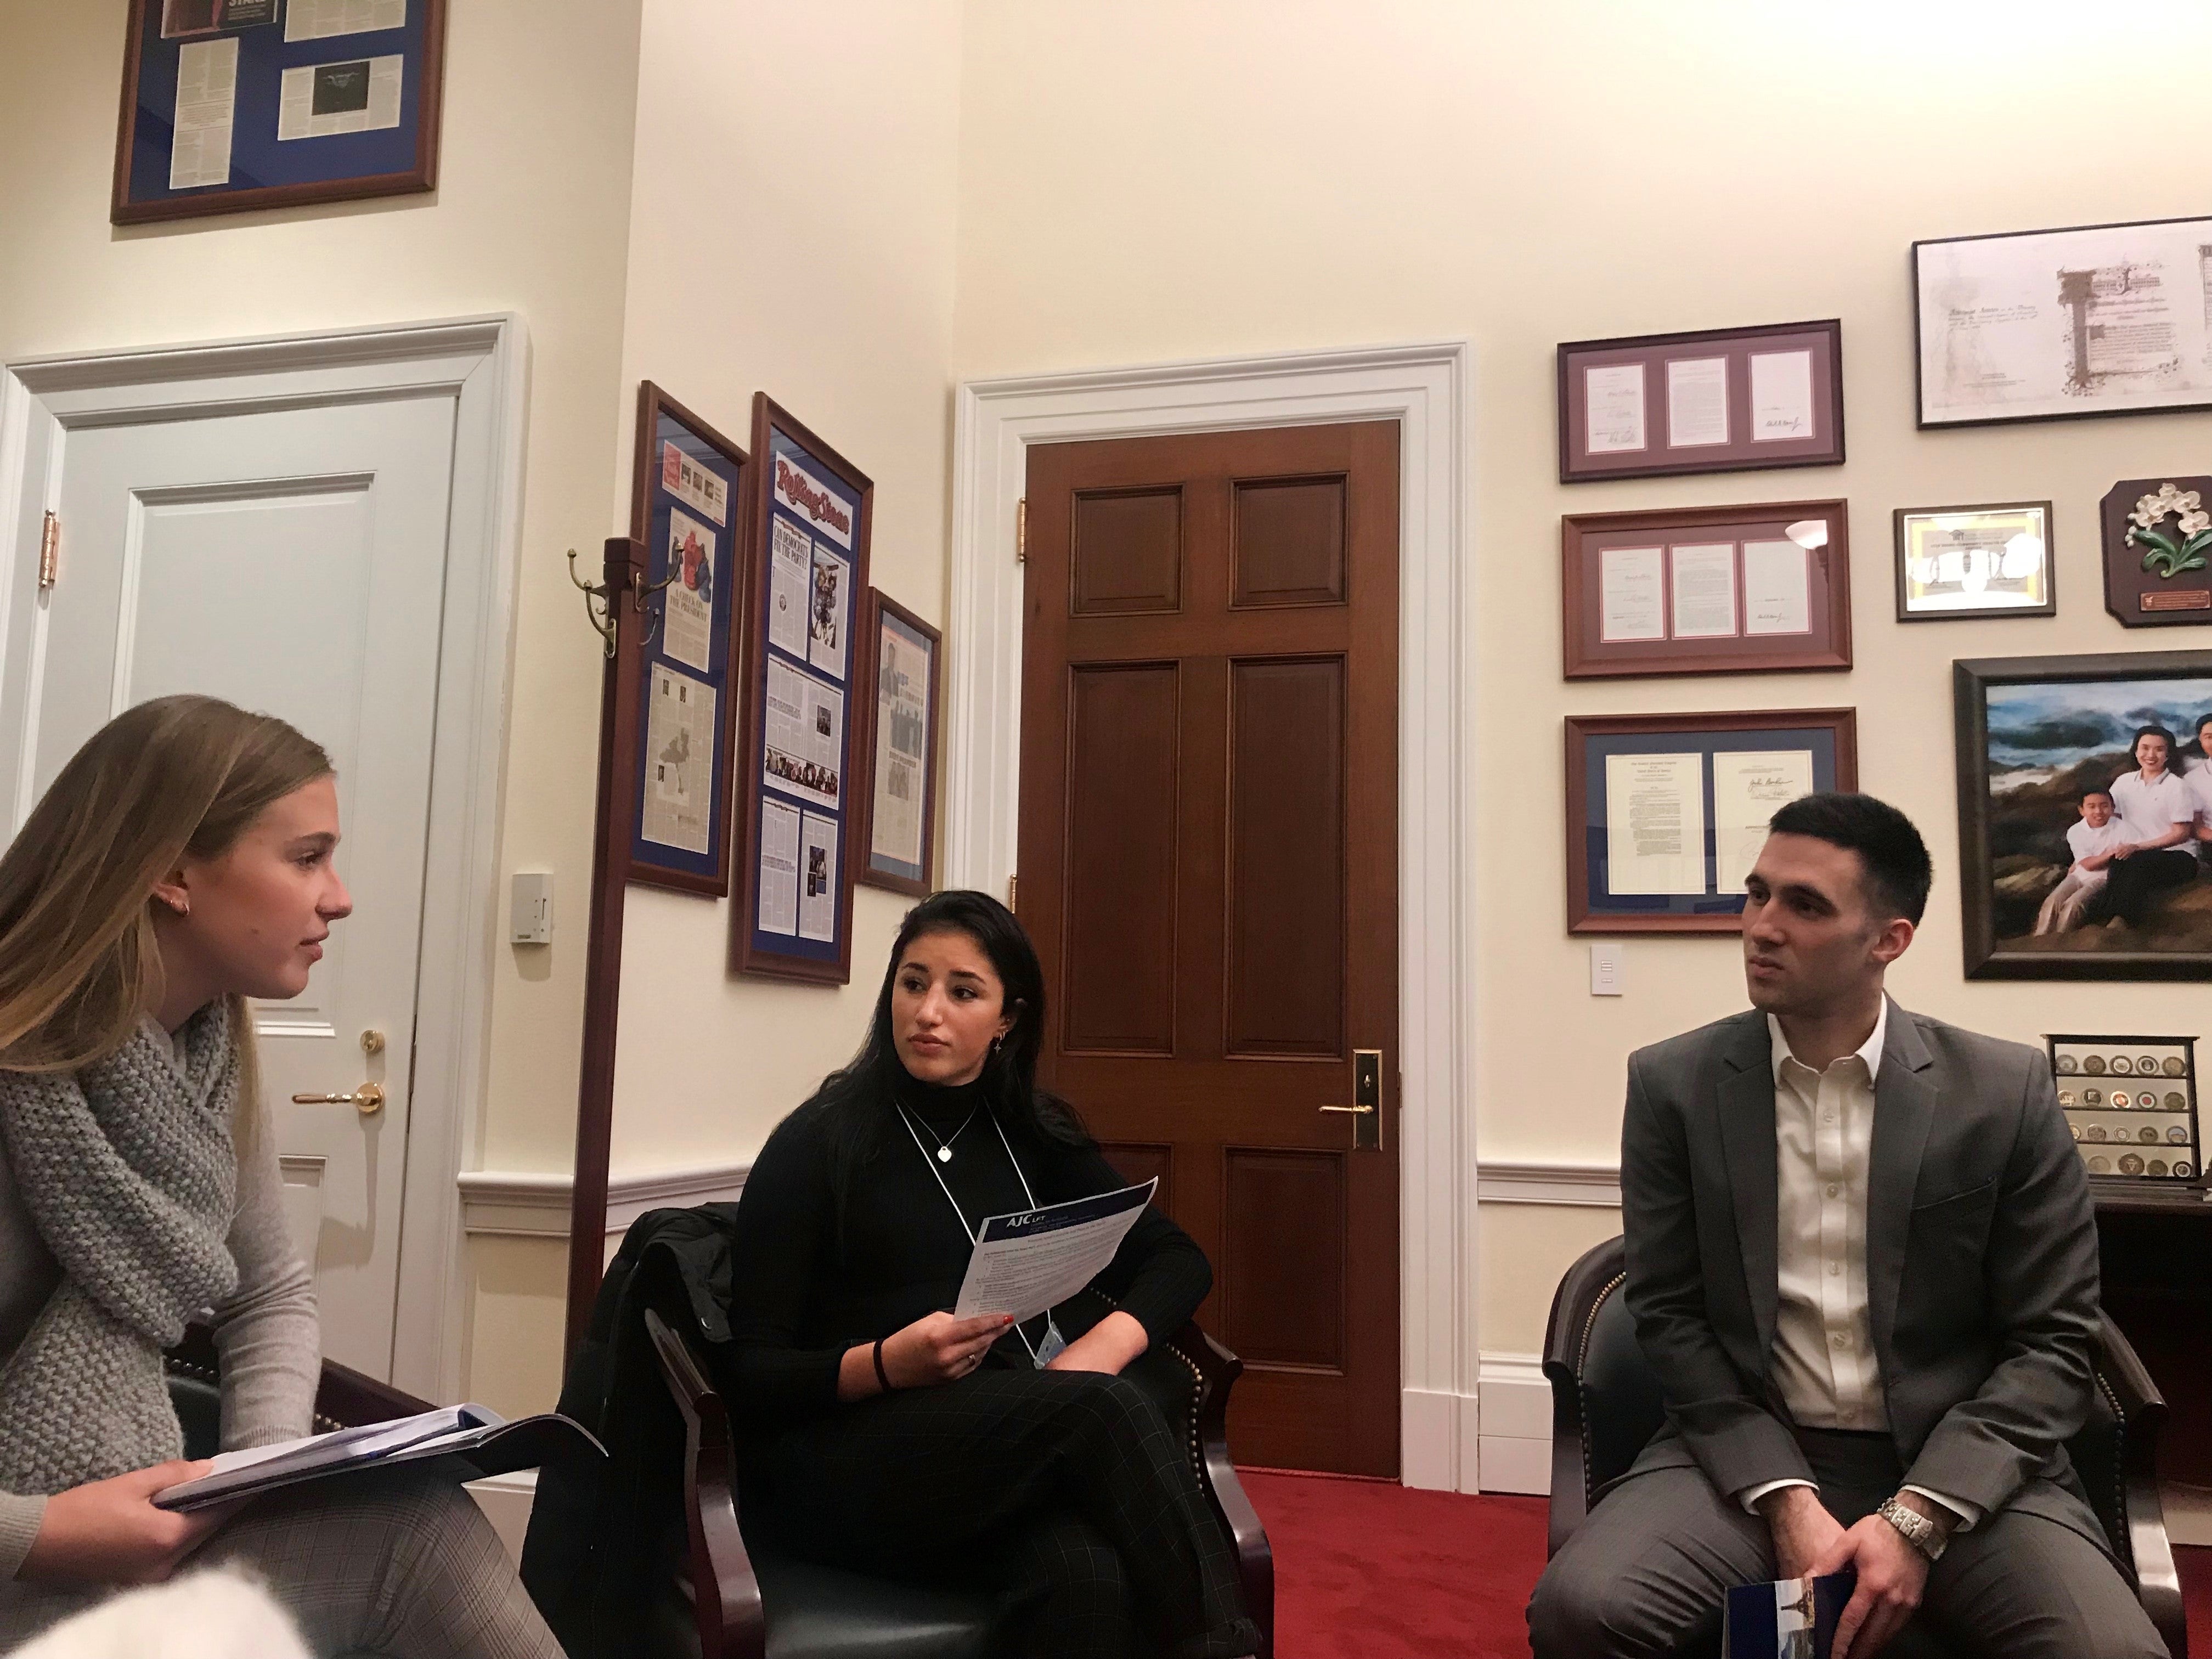 LFT 2019 - AJC LA LFT students leading the advocacy meetings with Corey Jacobson of Representative Ted Lieu's Office